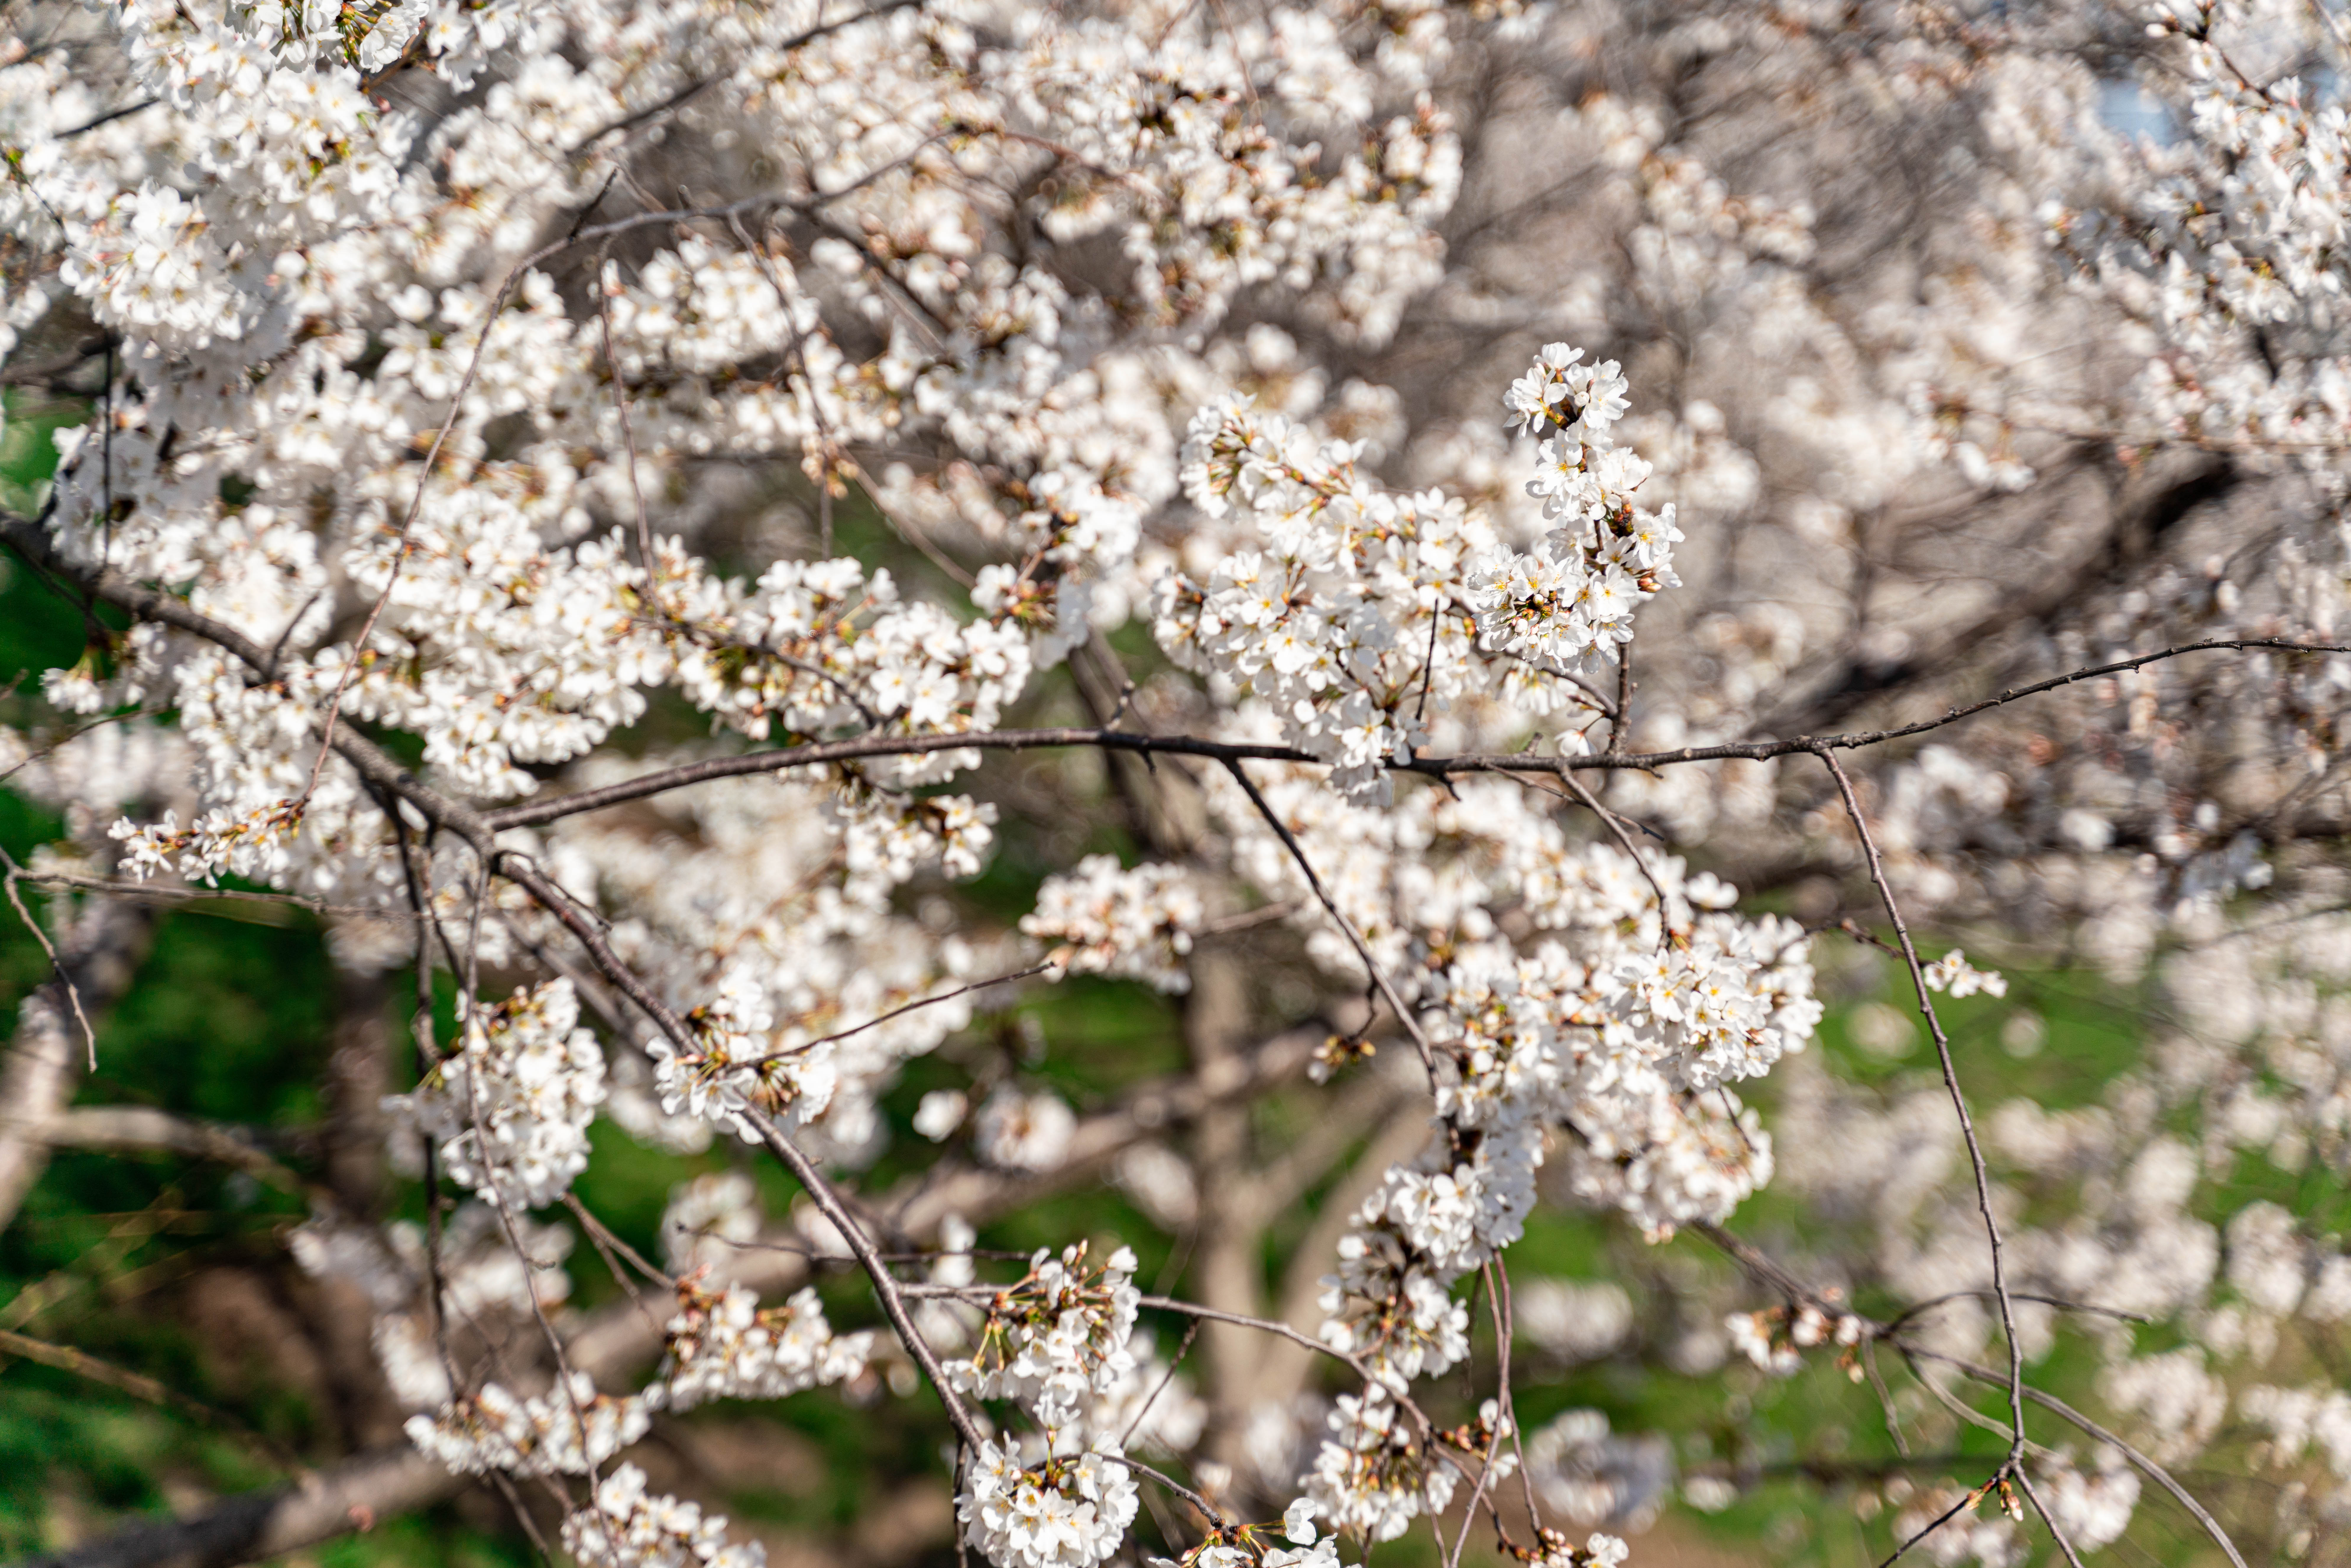 The Japanese Yoshino cherry blossom trees are blooming in White River State Park, signaling spring’s arrival.